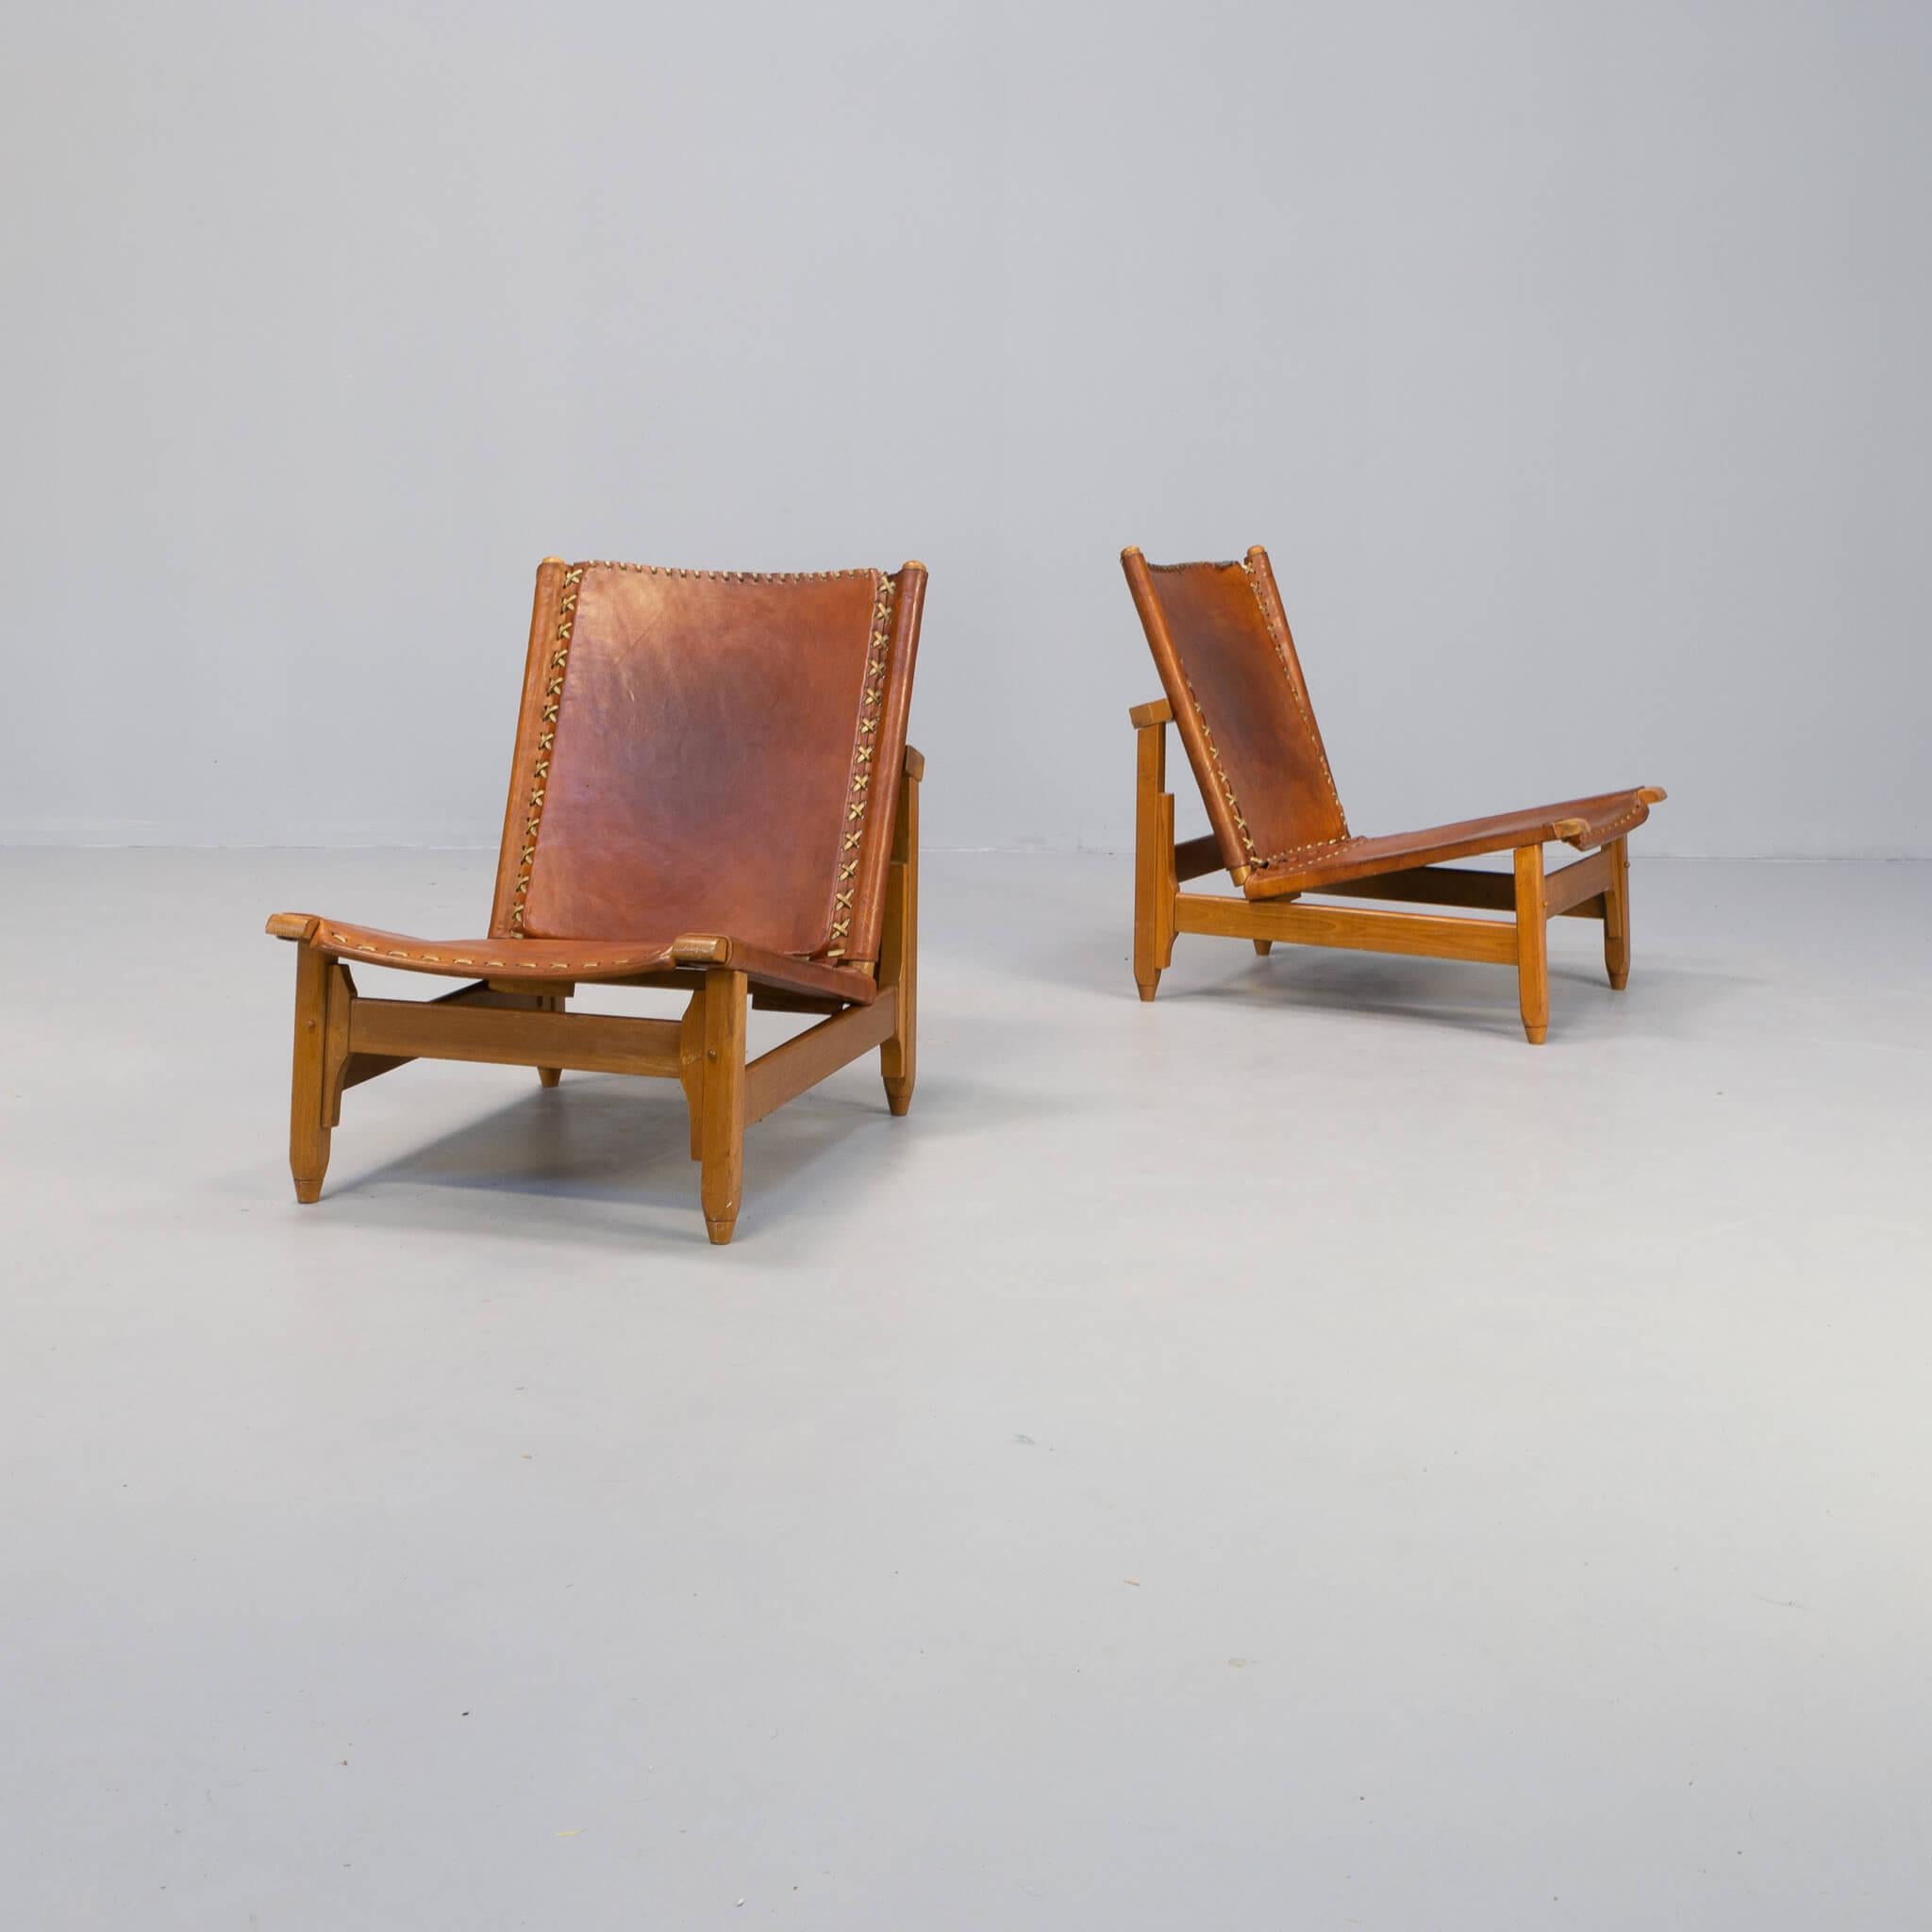 German born designer Werner Biermann settled in Colombia in the 1930’s and established a furniture factory which brought European and Scandinavian styles to South America. His son continued production of many of Biermann’s designs into the 1970’s